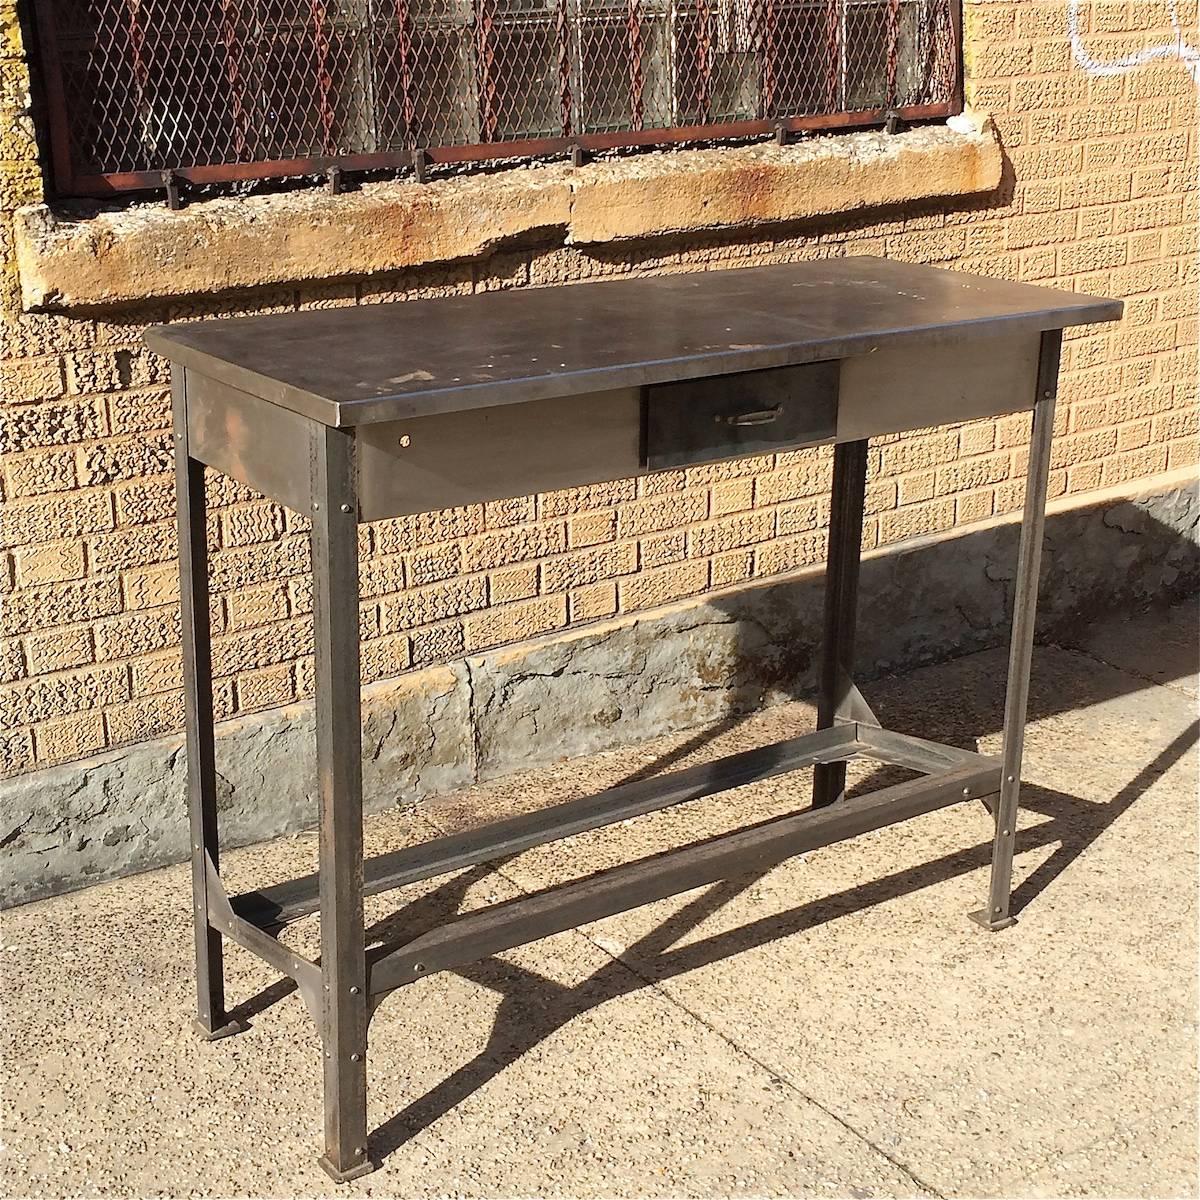 Brushed steel, Industrial work bench tables with storage drawer.